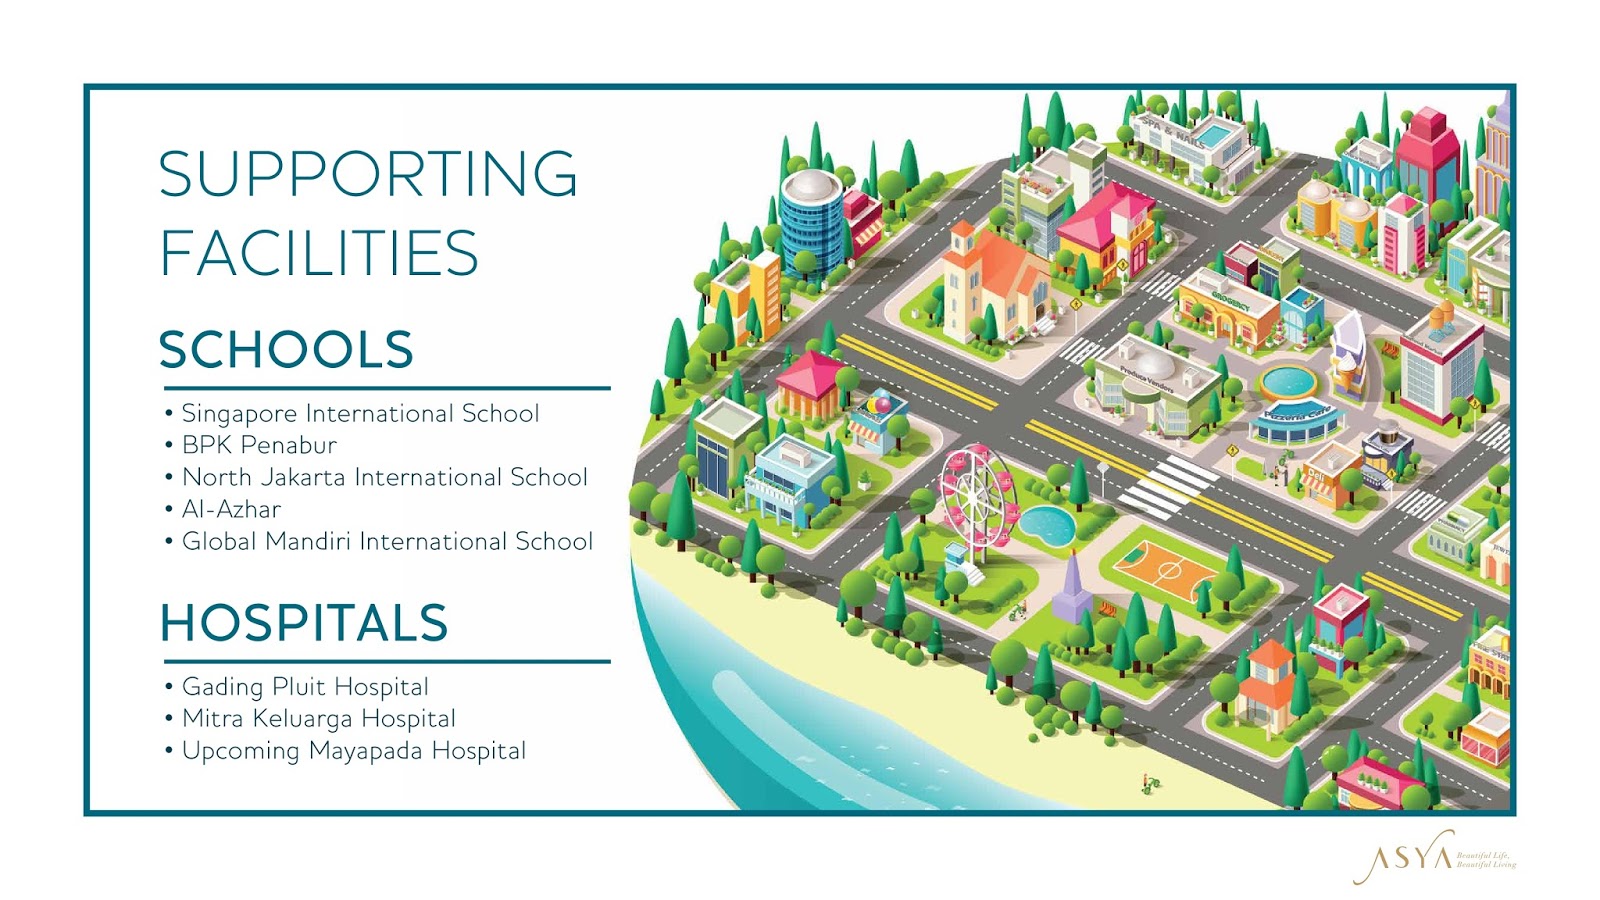 What sports facilities your school have. School facilities список. Sport School facilities список. Sport facilities at School примеры. Facilities примеры.